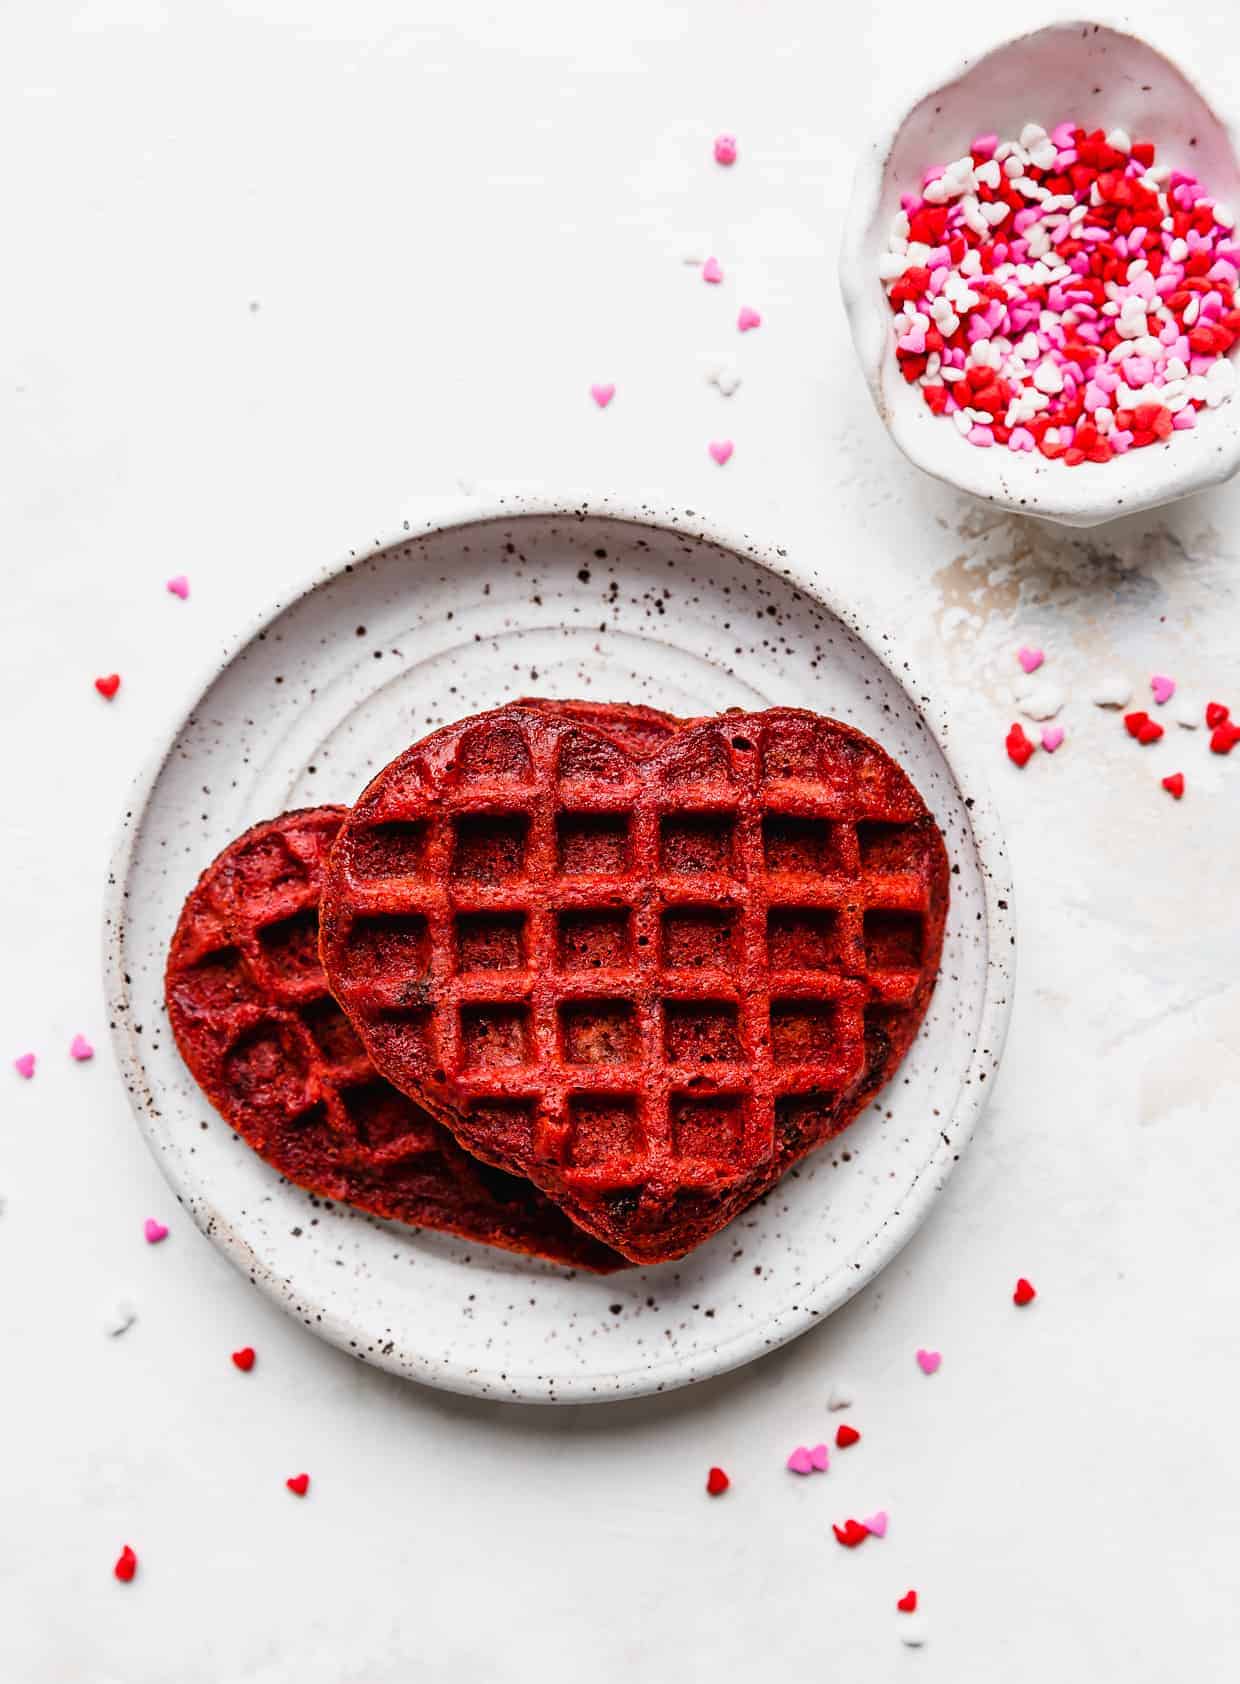 A heart shaped red velvet waffle on a white plate against a white background.